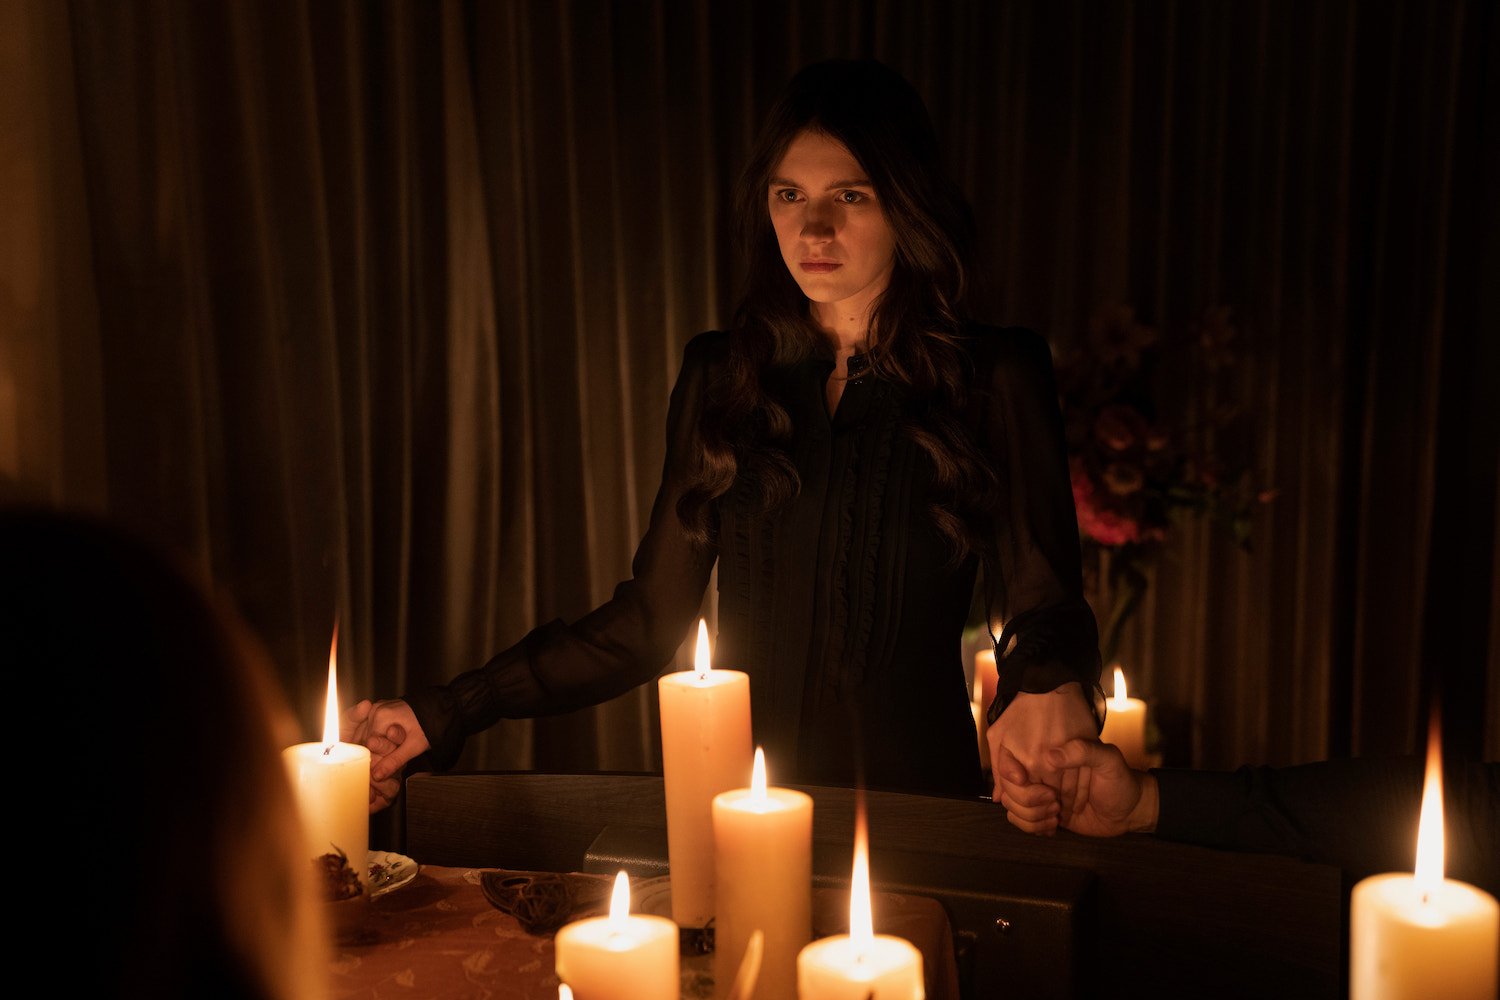 'Servant' episode 'Séance' features Nell Tiger Free as Leanne, seen here in a black dress, surrounded by candles.